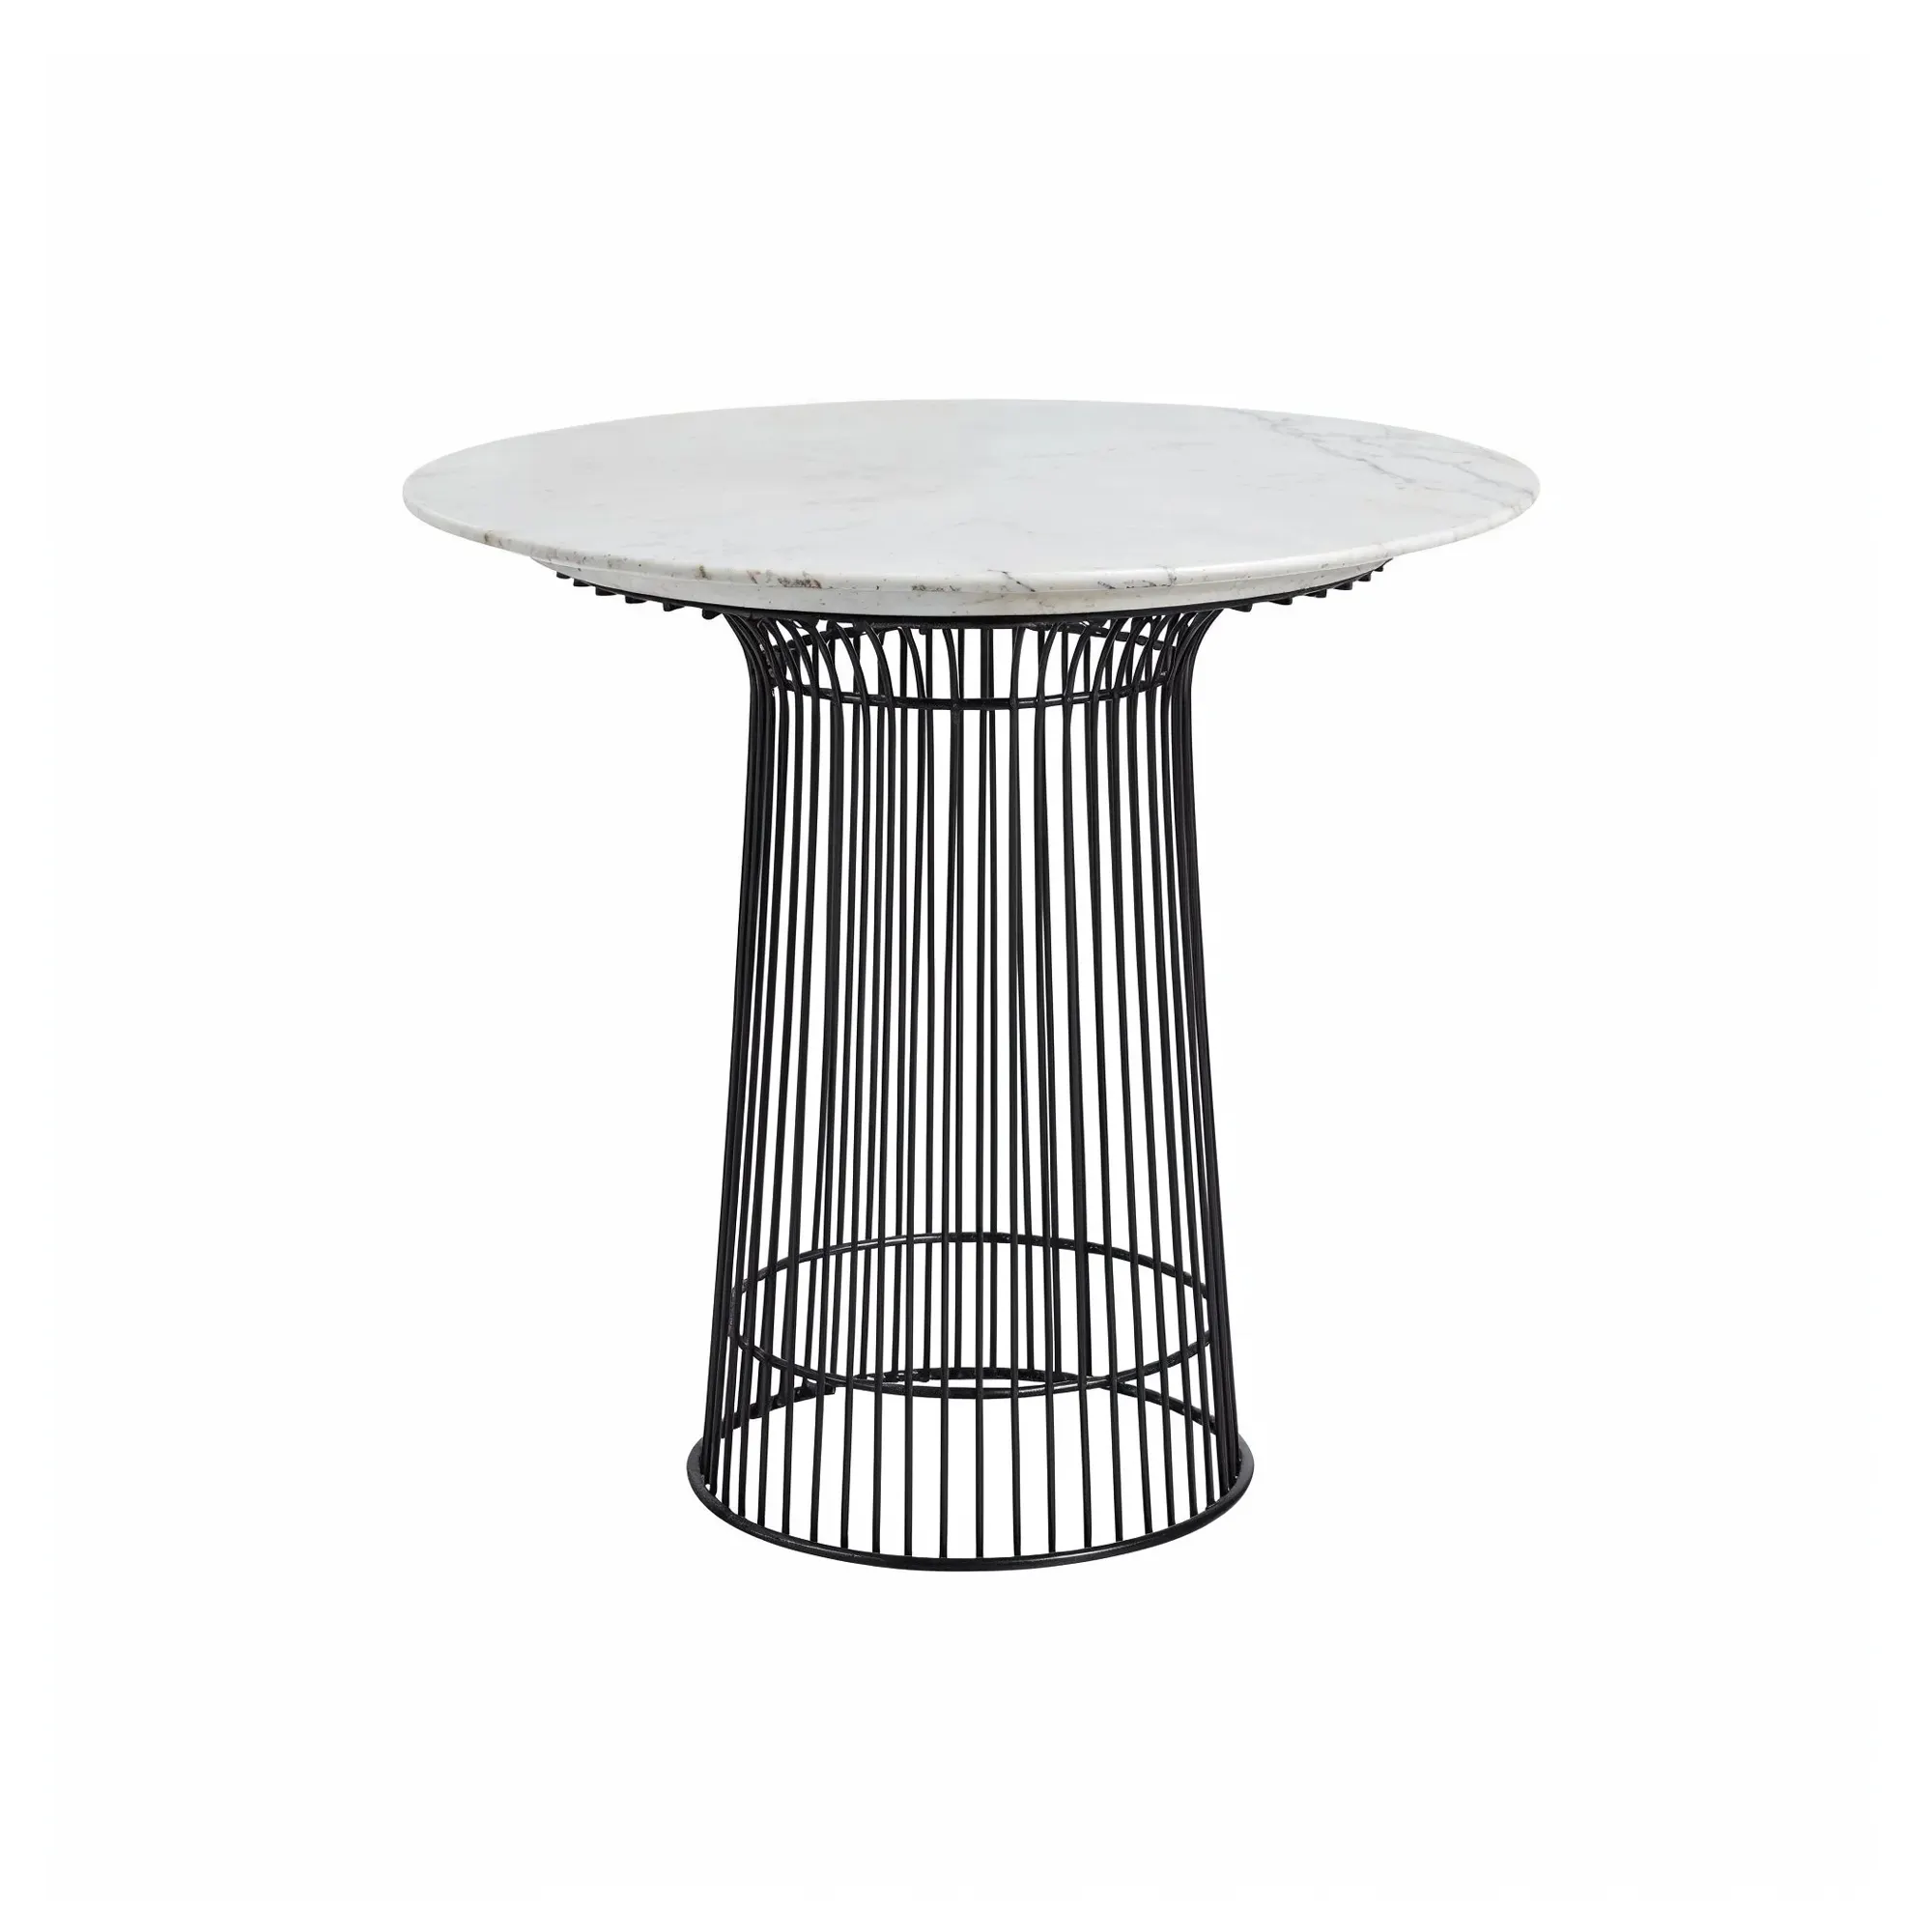 Round dining table Modern style special design dining table with metal frame and glass top Italian furniture dining room